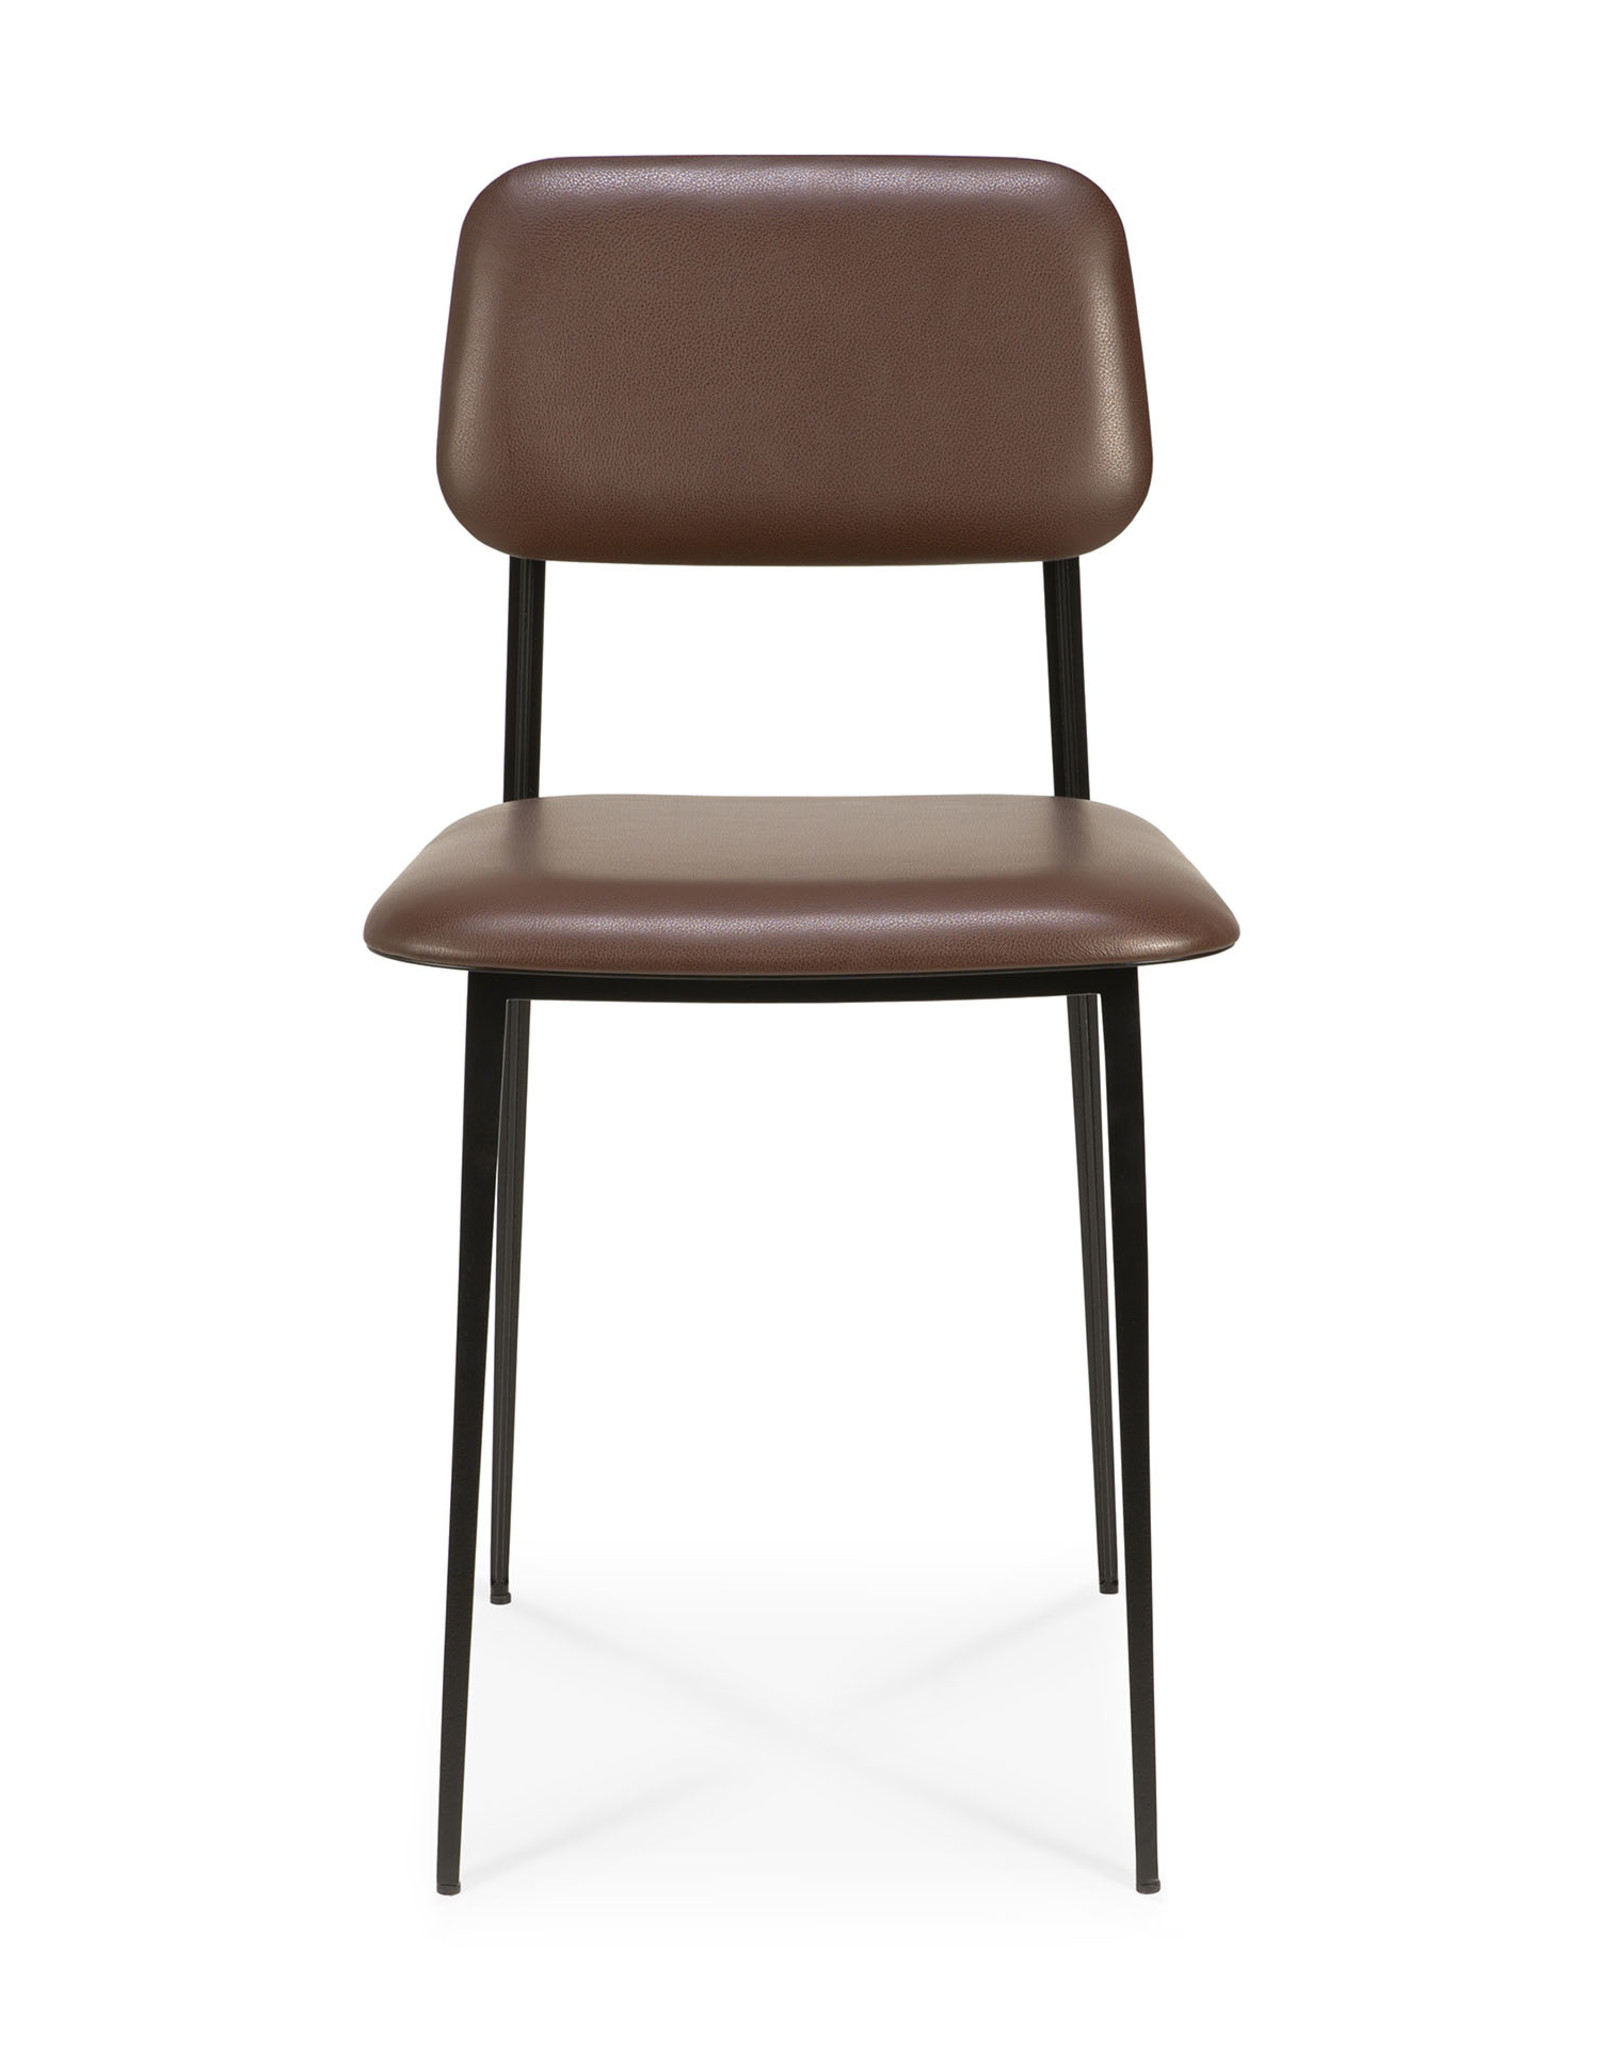 Dc Dining Chair - Chocolate Leather